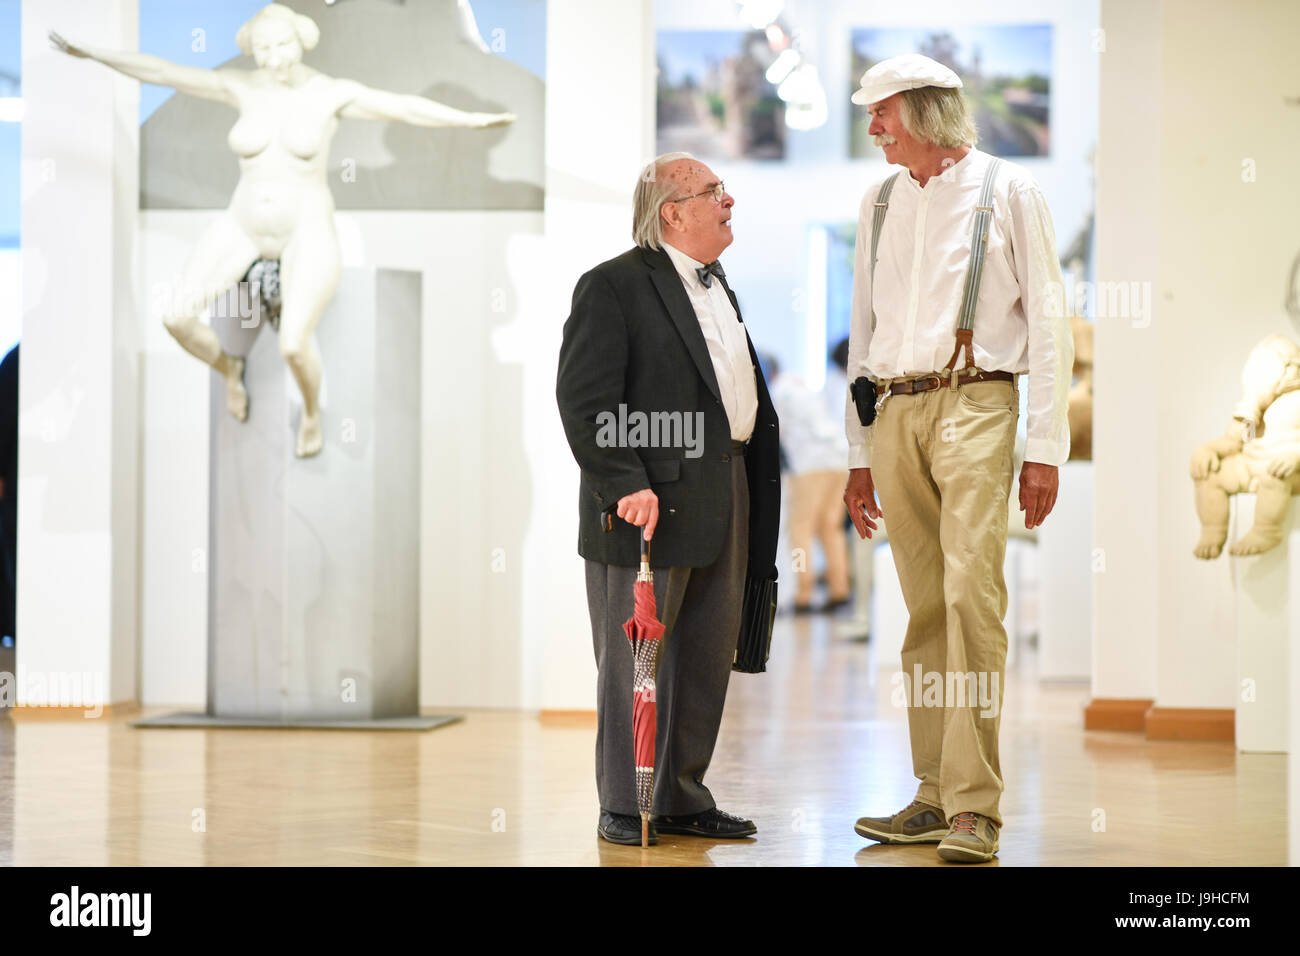 Ueberlingen, Germany. 1st June, 2017. Artist Peter Lenk (r) and Professor Helmut Weidhase, literary scholard and academic council for German language and literature at the university of Konstanz, photographed at his exhibition 'Peter Lenk - 40 Jahre Zoff und Zwinkern' (lit. '40 years of trouble and winking') at the 'Staedtische Galerie' in Ueberlingen, Germany, 1 June 2017. The exhibition is open from 2 June until 15 October 2017. Photo: Felix Kästle/dpa/Alamy Live News Stock Photo